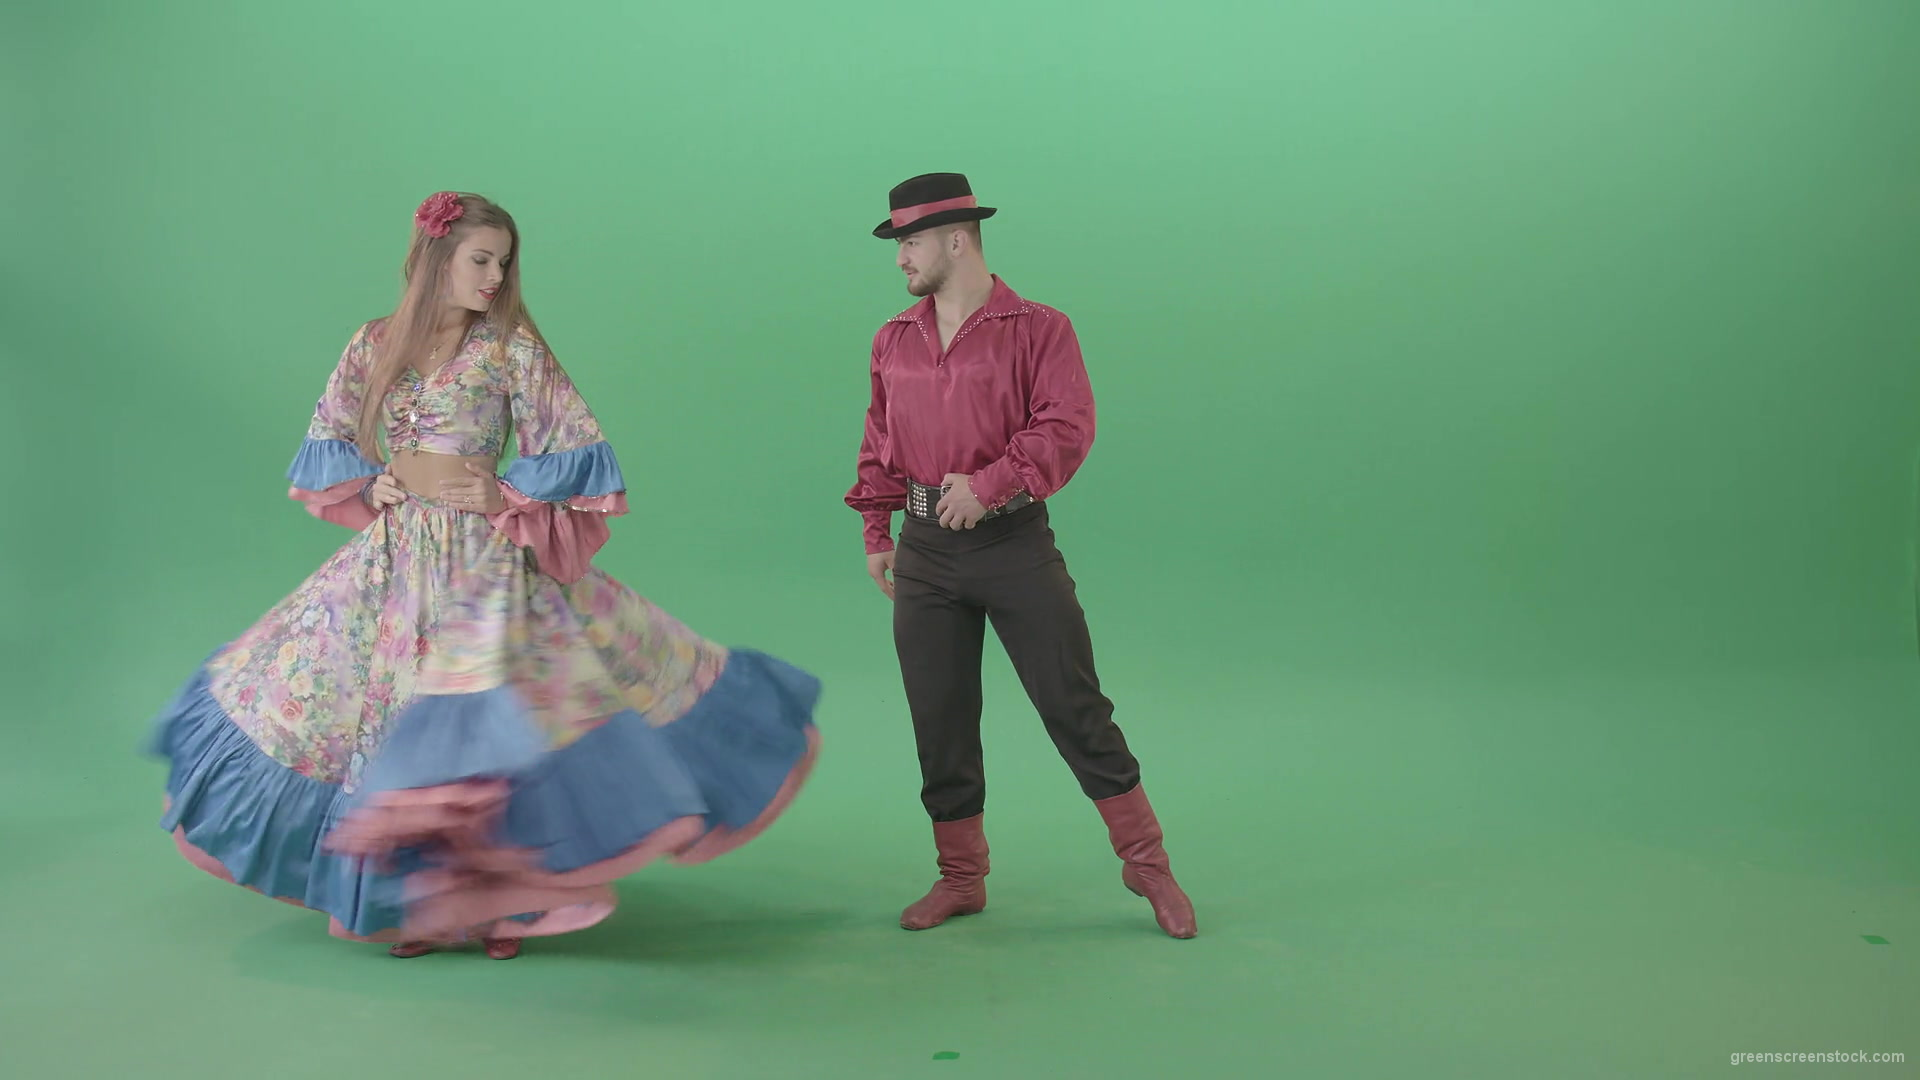 Folk-national-romania-dance-by-gypsy-tzigane-couple-isolated-on-green-screen-4K-video-footage-1920_009 Green Screen Stock